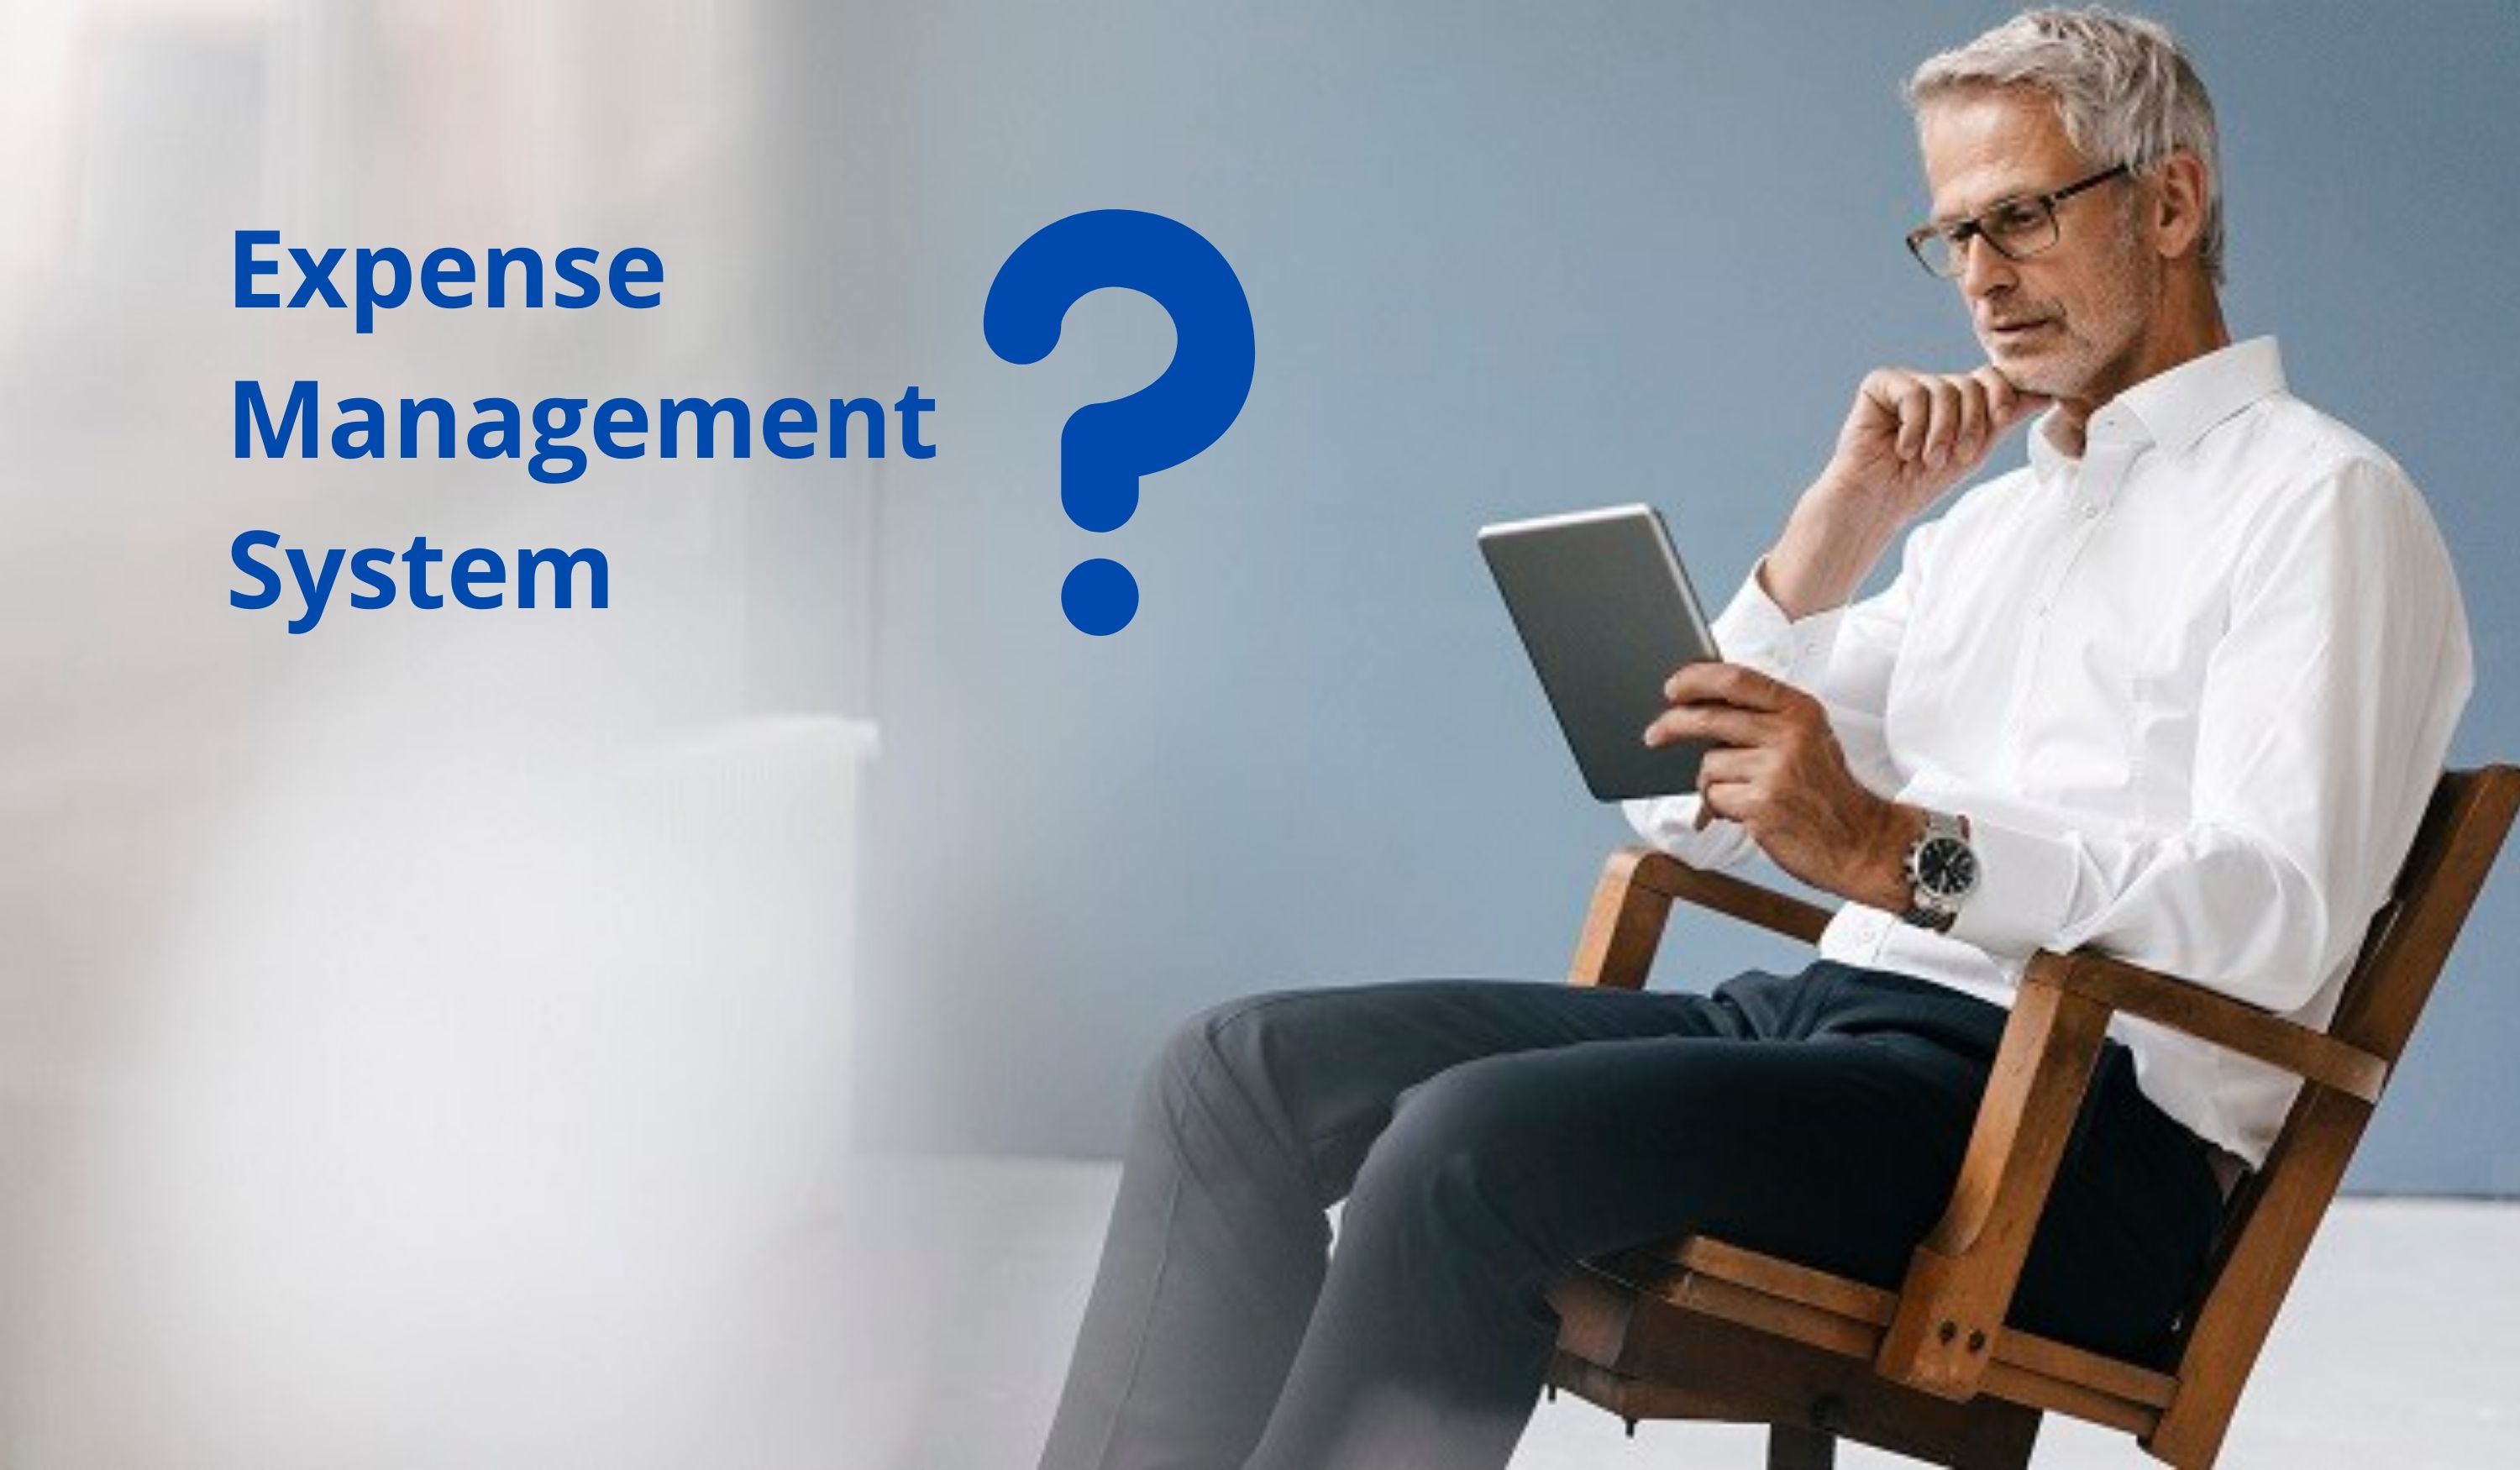 Questions you should ask before employing Expense Management System